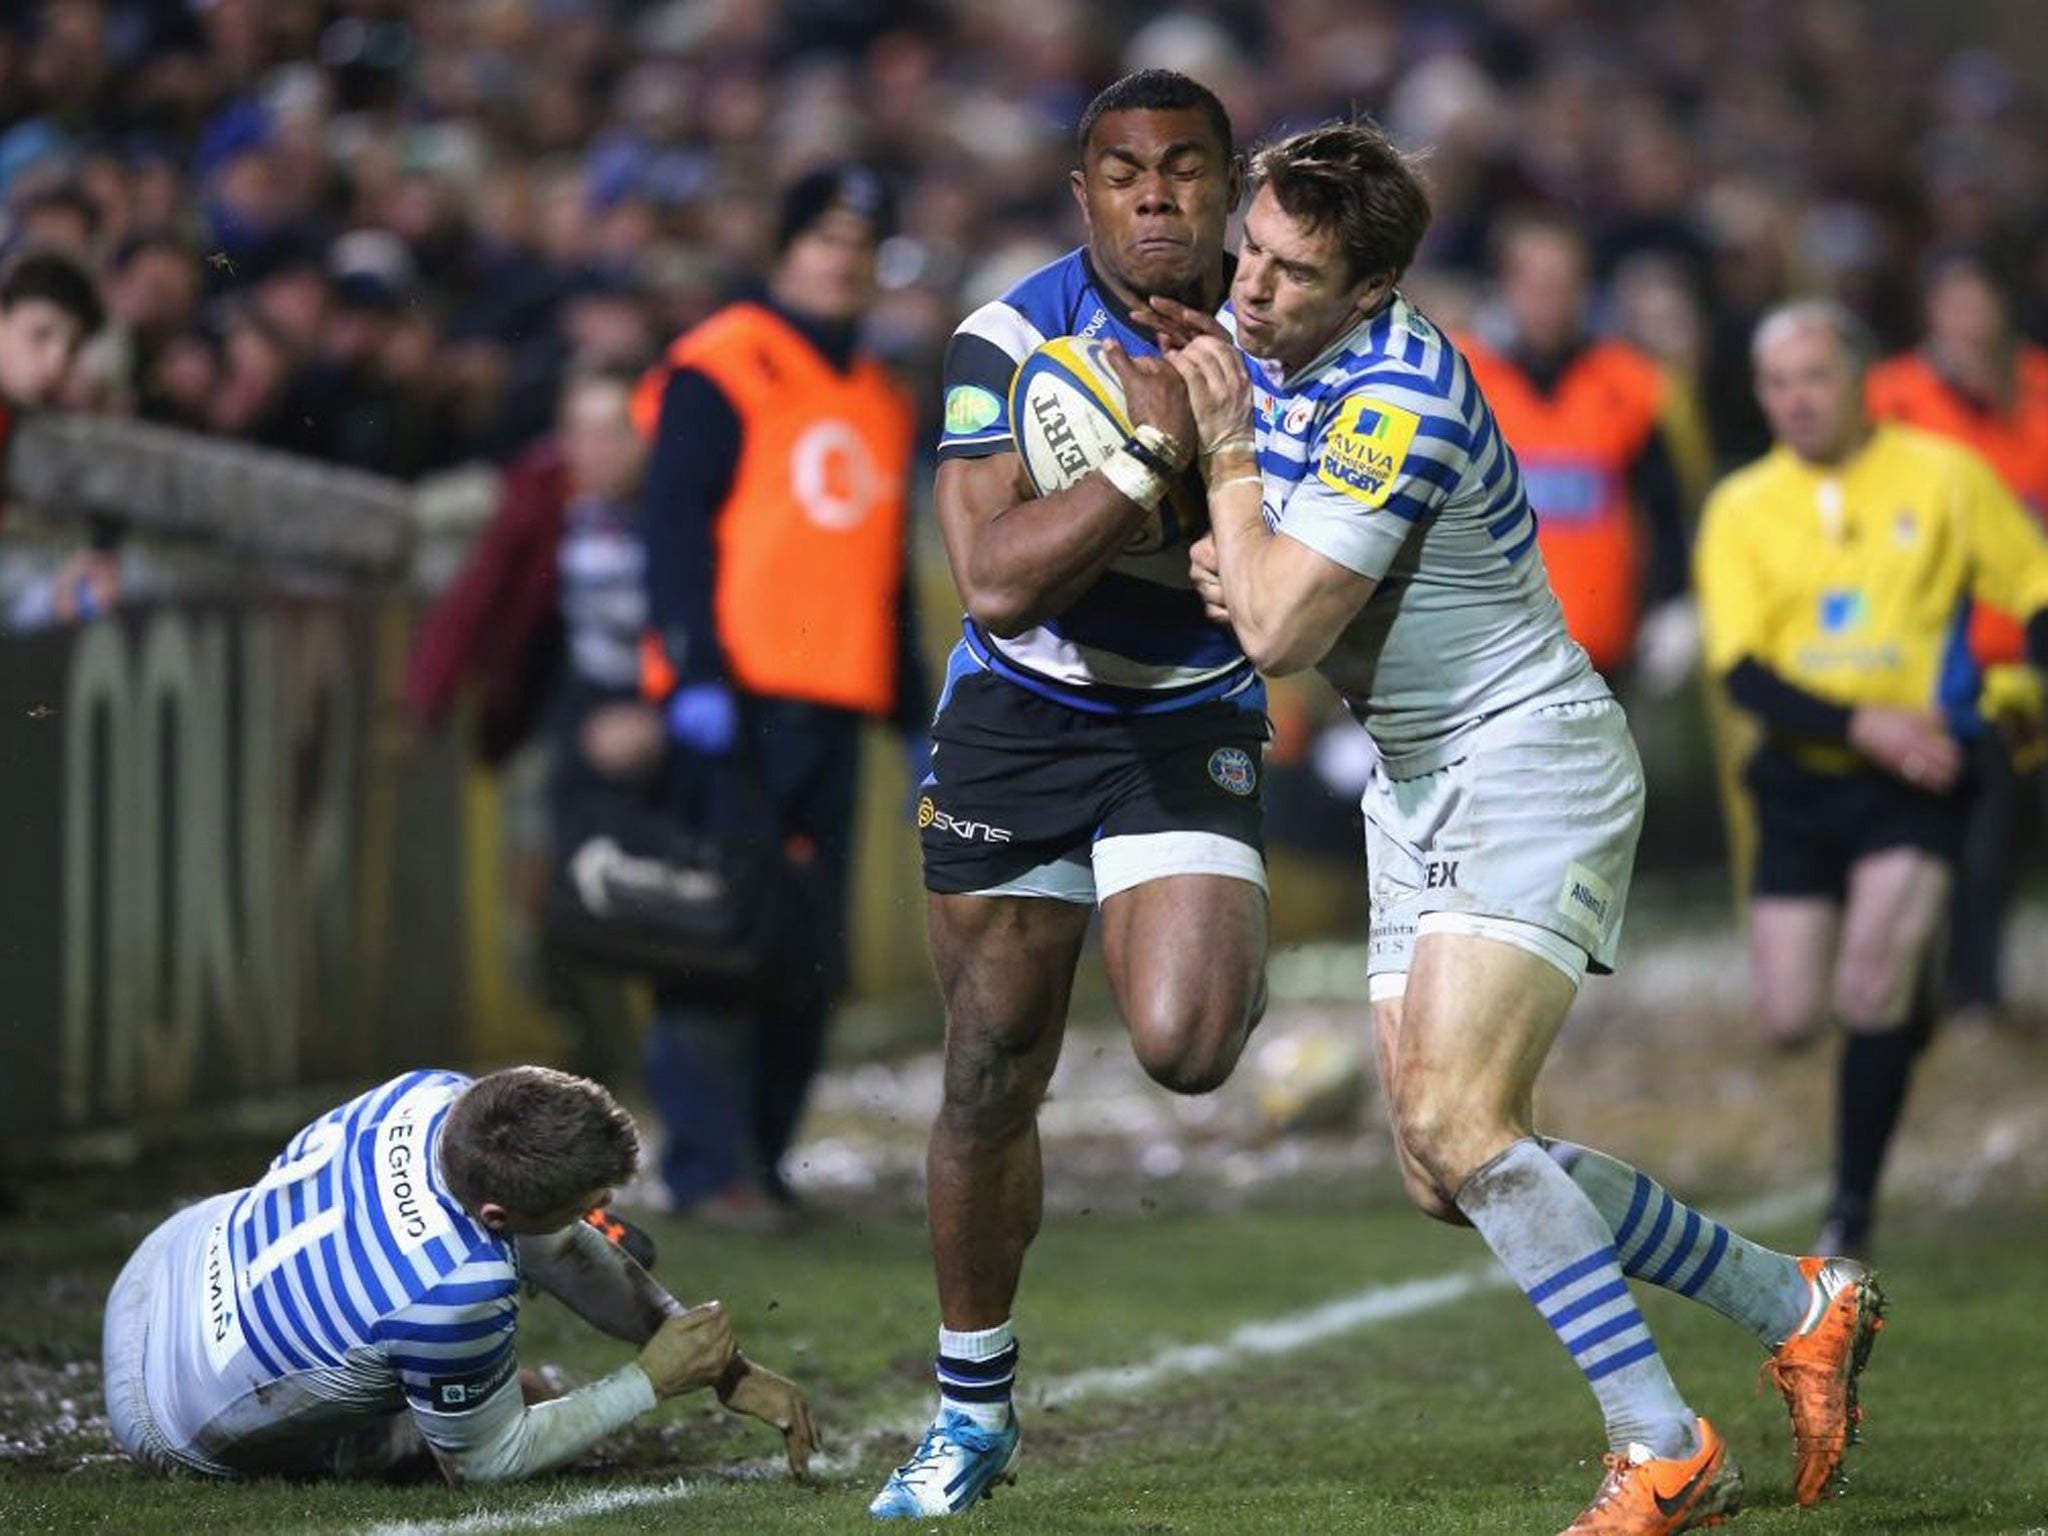 Semesa Rokoduguni of Bath is pushed into touch by Chris Wyles which resulted in Wyles being shown the yellow card during the Aviva Premiership match between Bath and Saracens